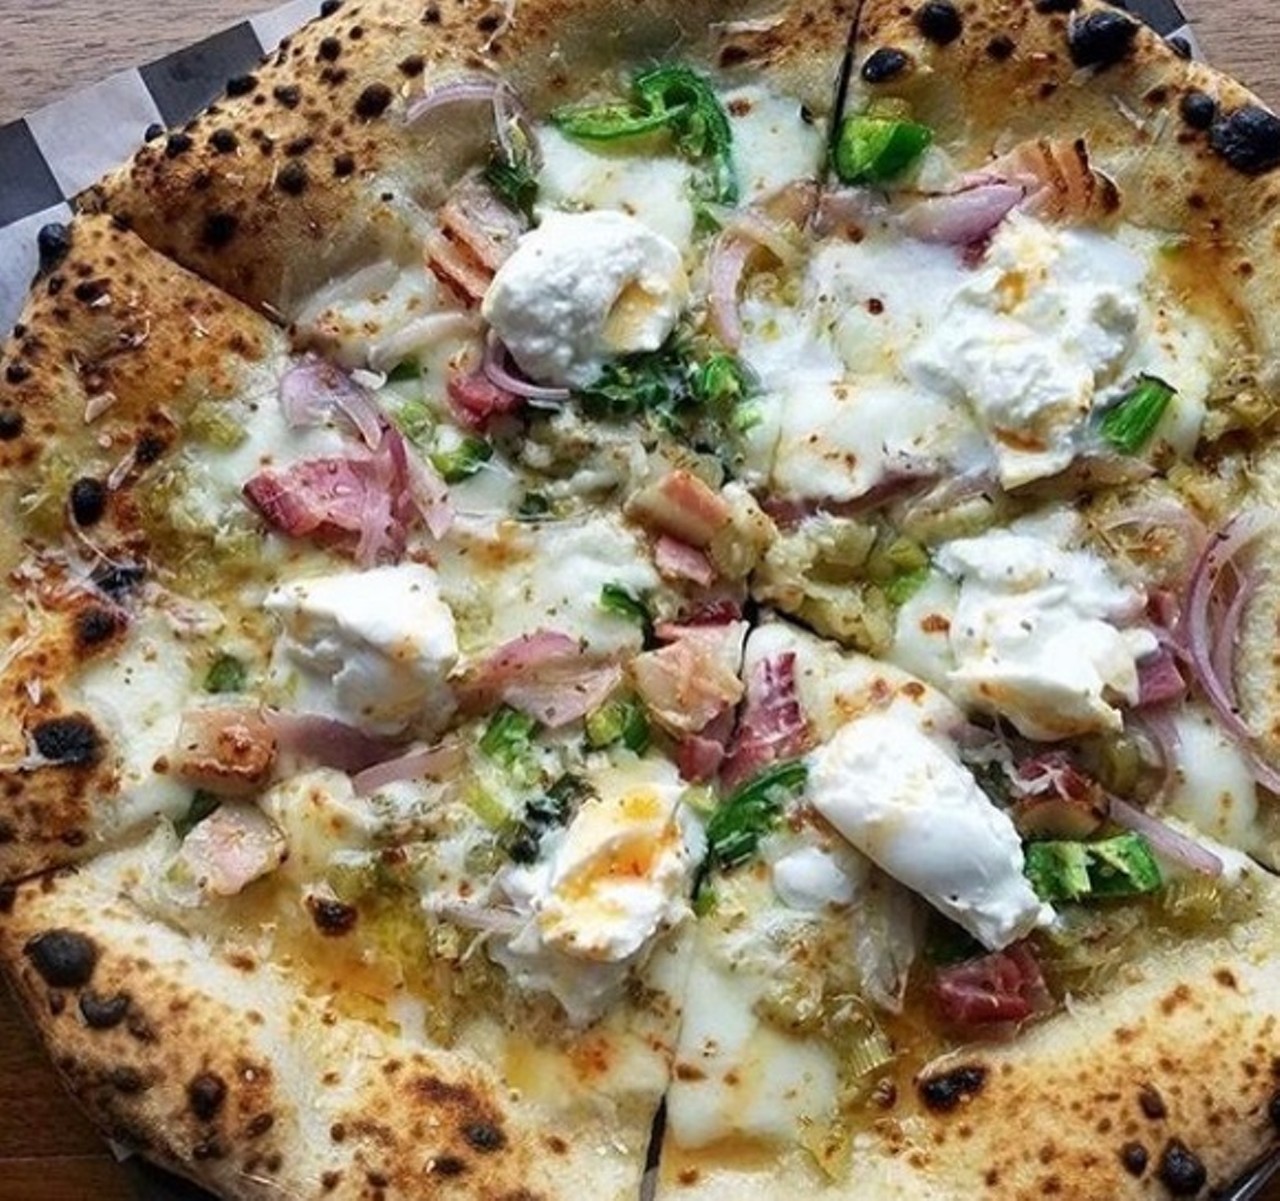 Citizen Pie 
15710 Waterloo Rd., 216-417-2742
While this fantastic pizzeria has opened up a location in Ohio City, the Collinwood spot is our favorite for pure coziness. The artisan wood-fired pizza is customizable, though the menu suggestions are pretty close to perfection.  
Photo via citizen.pie/Instagram